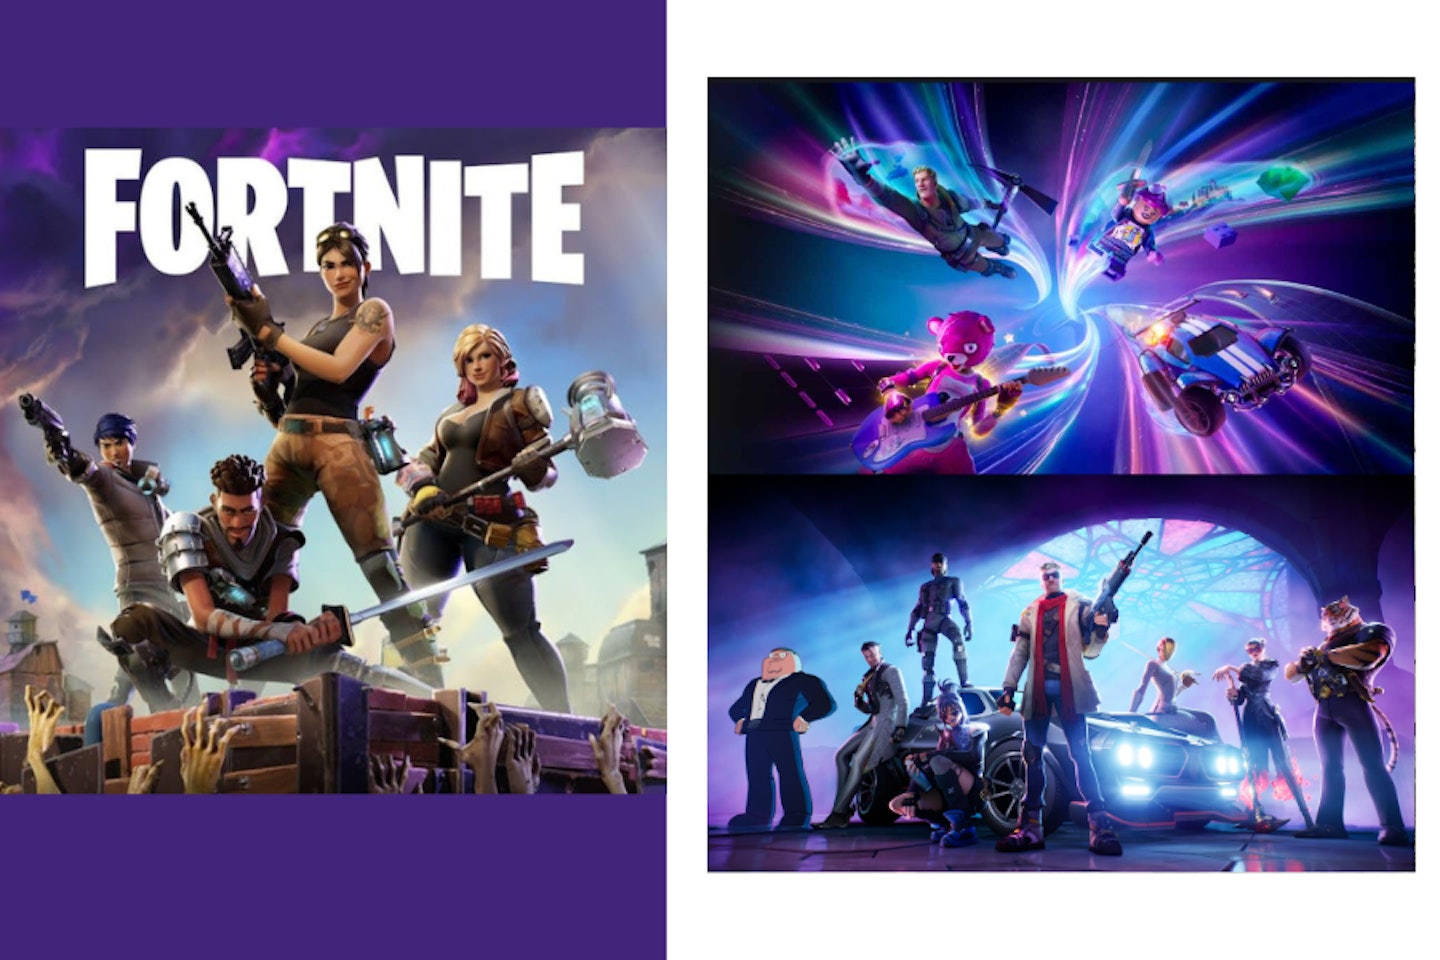 Fortnite - one of the best PC games